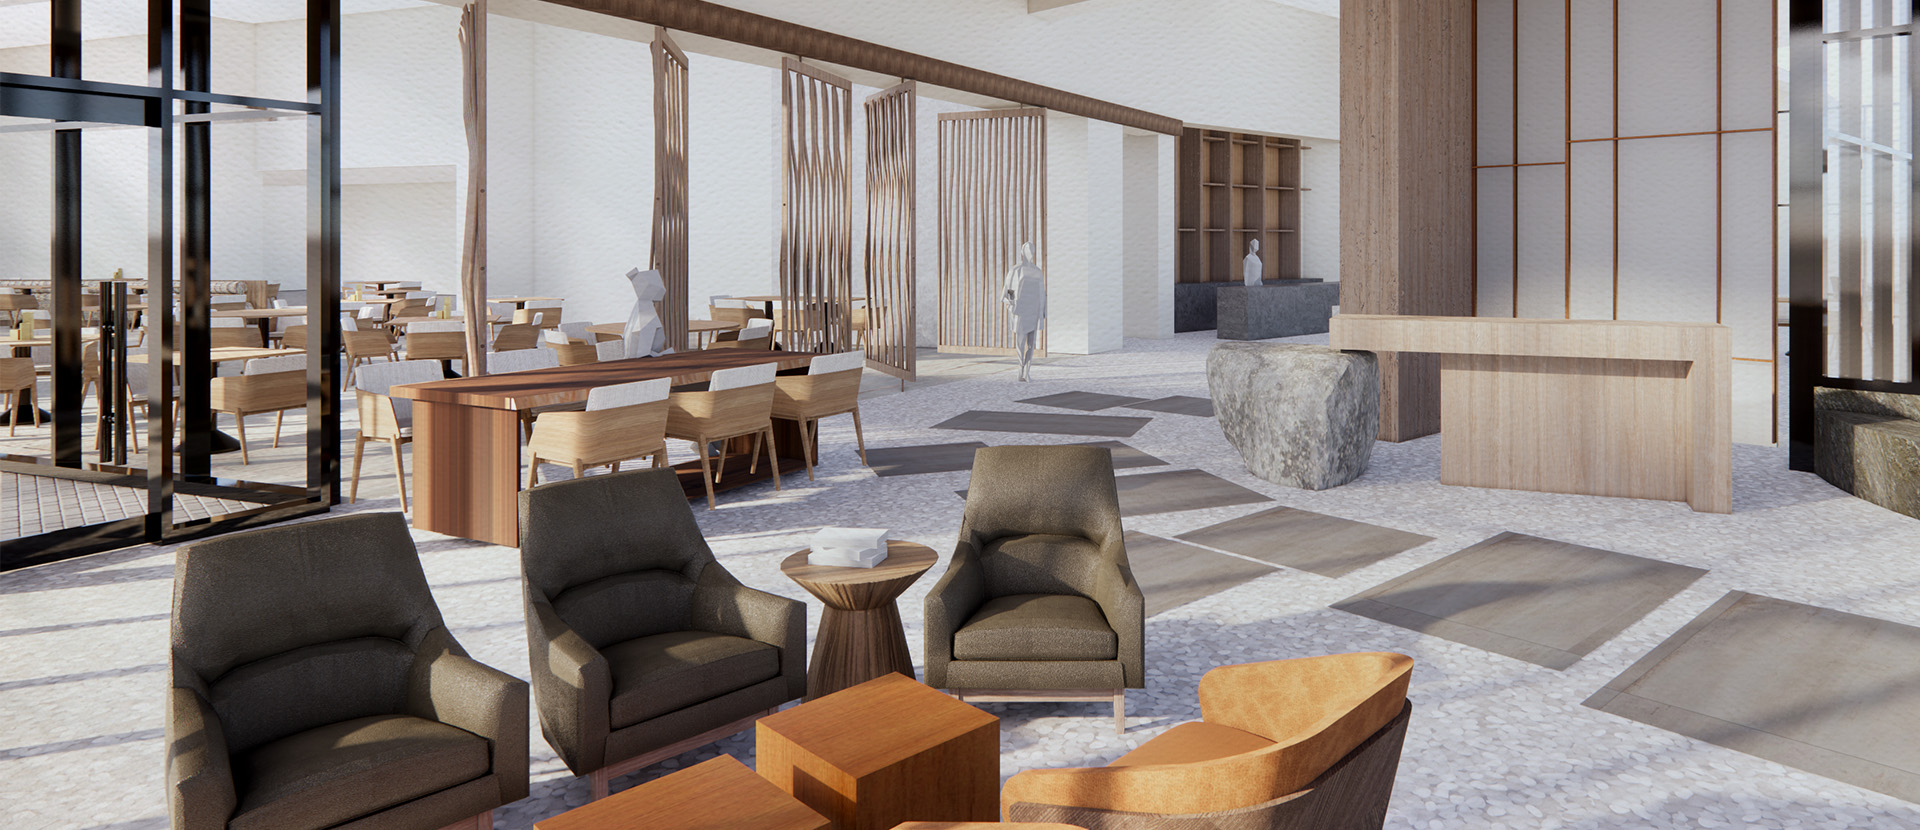 rendering of lobby of Enso Verde, located in simi valley, california